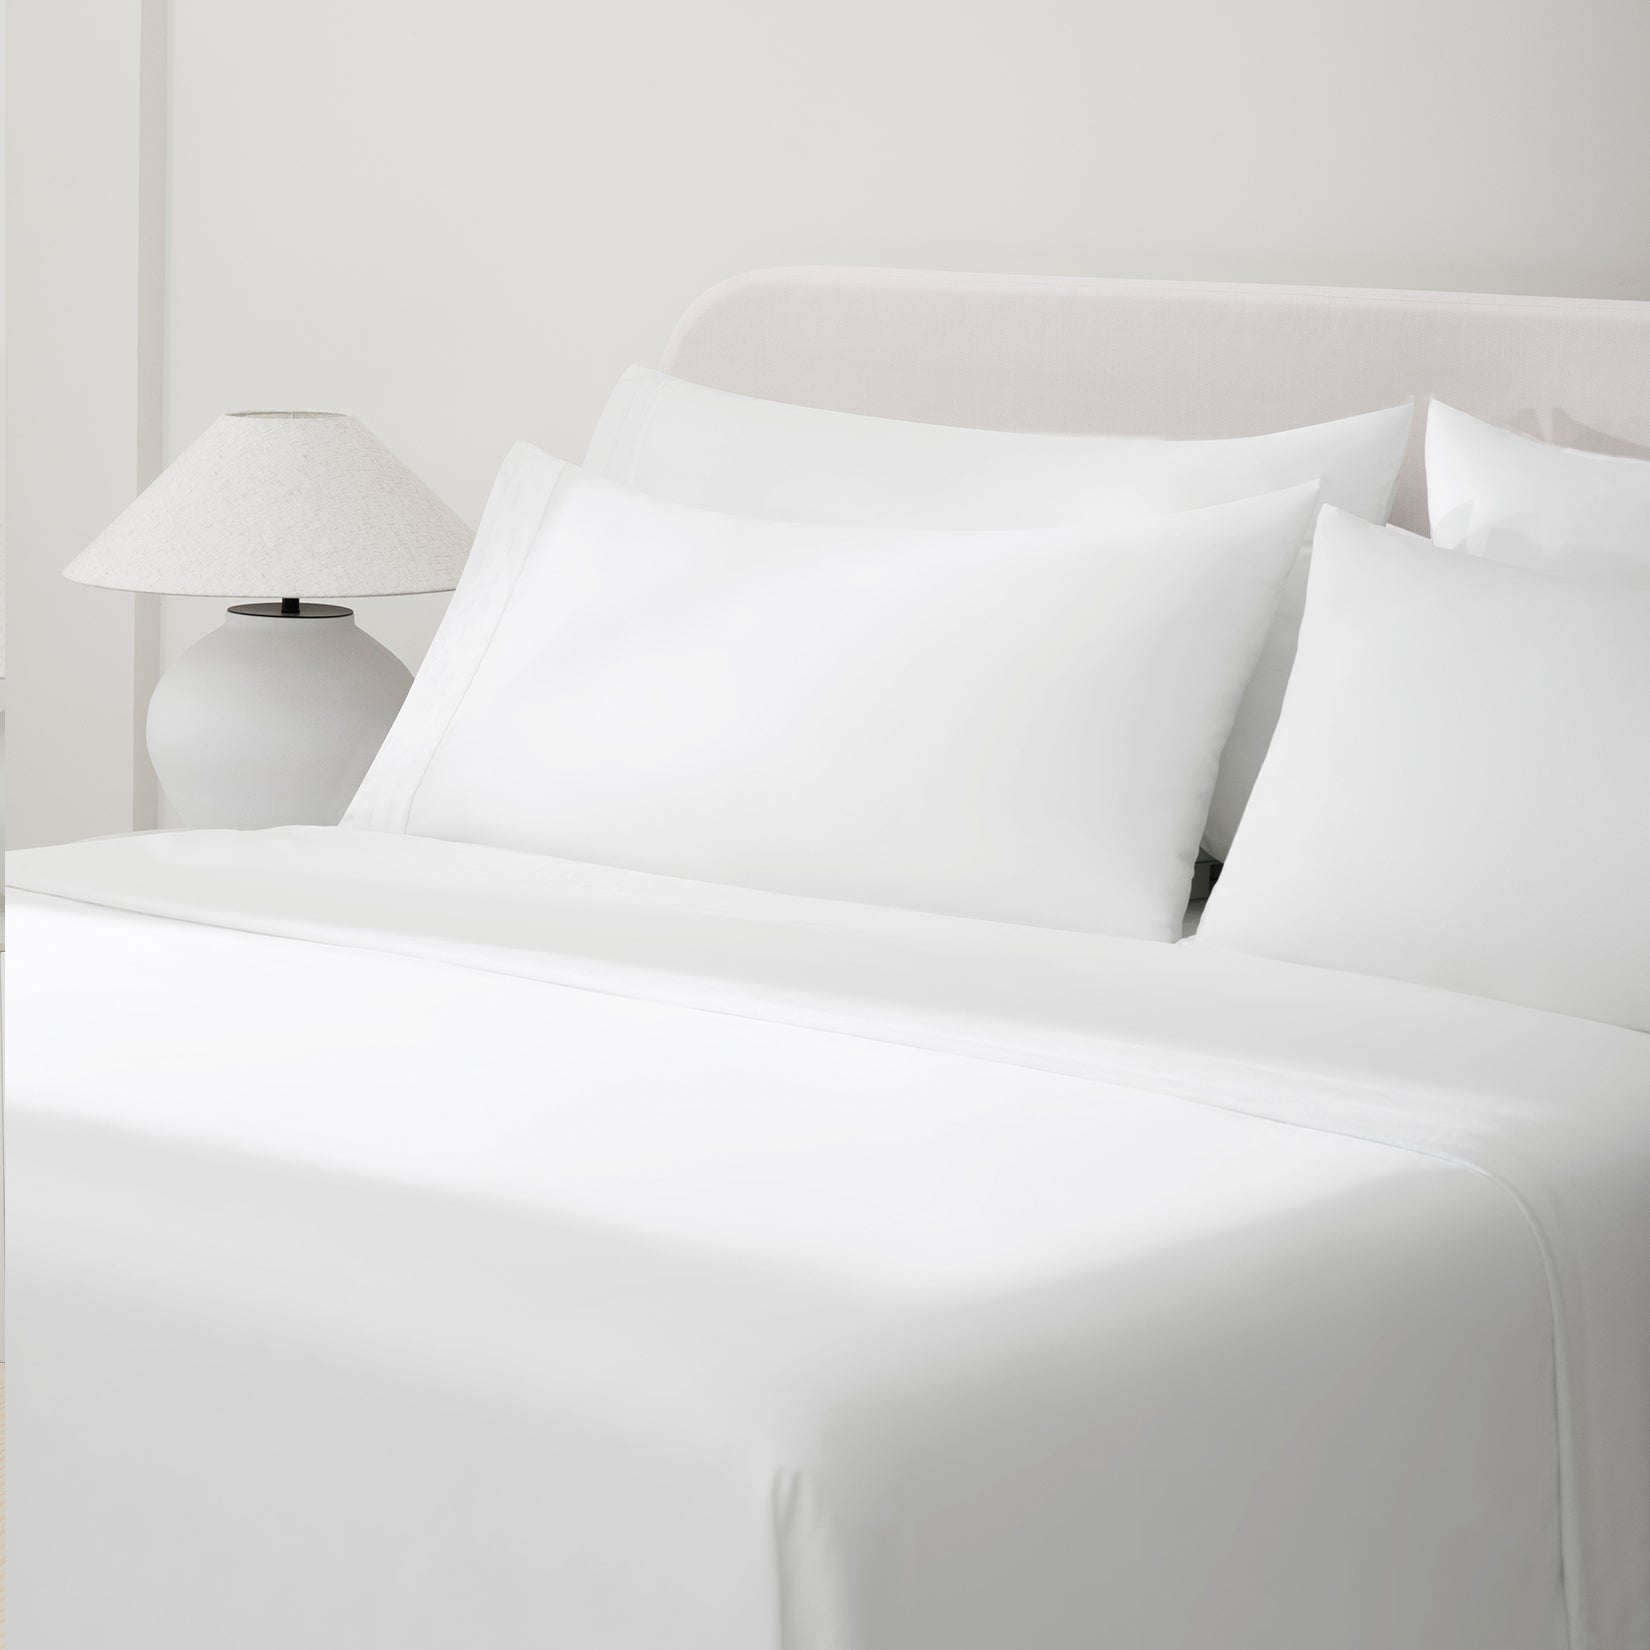 Camille Classic White Pleated bed set. White pillows and white sheets on bed with side table and lamp from side angle.